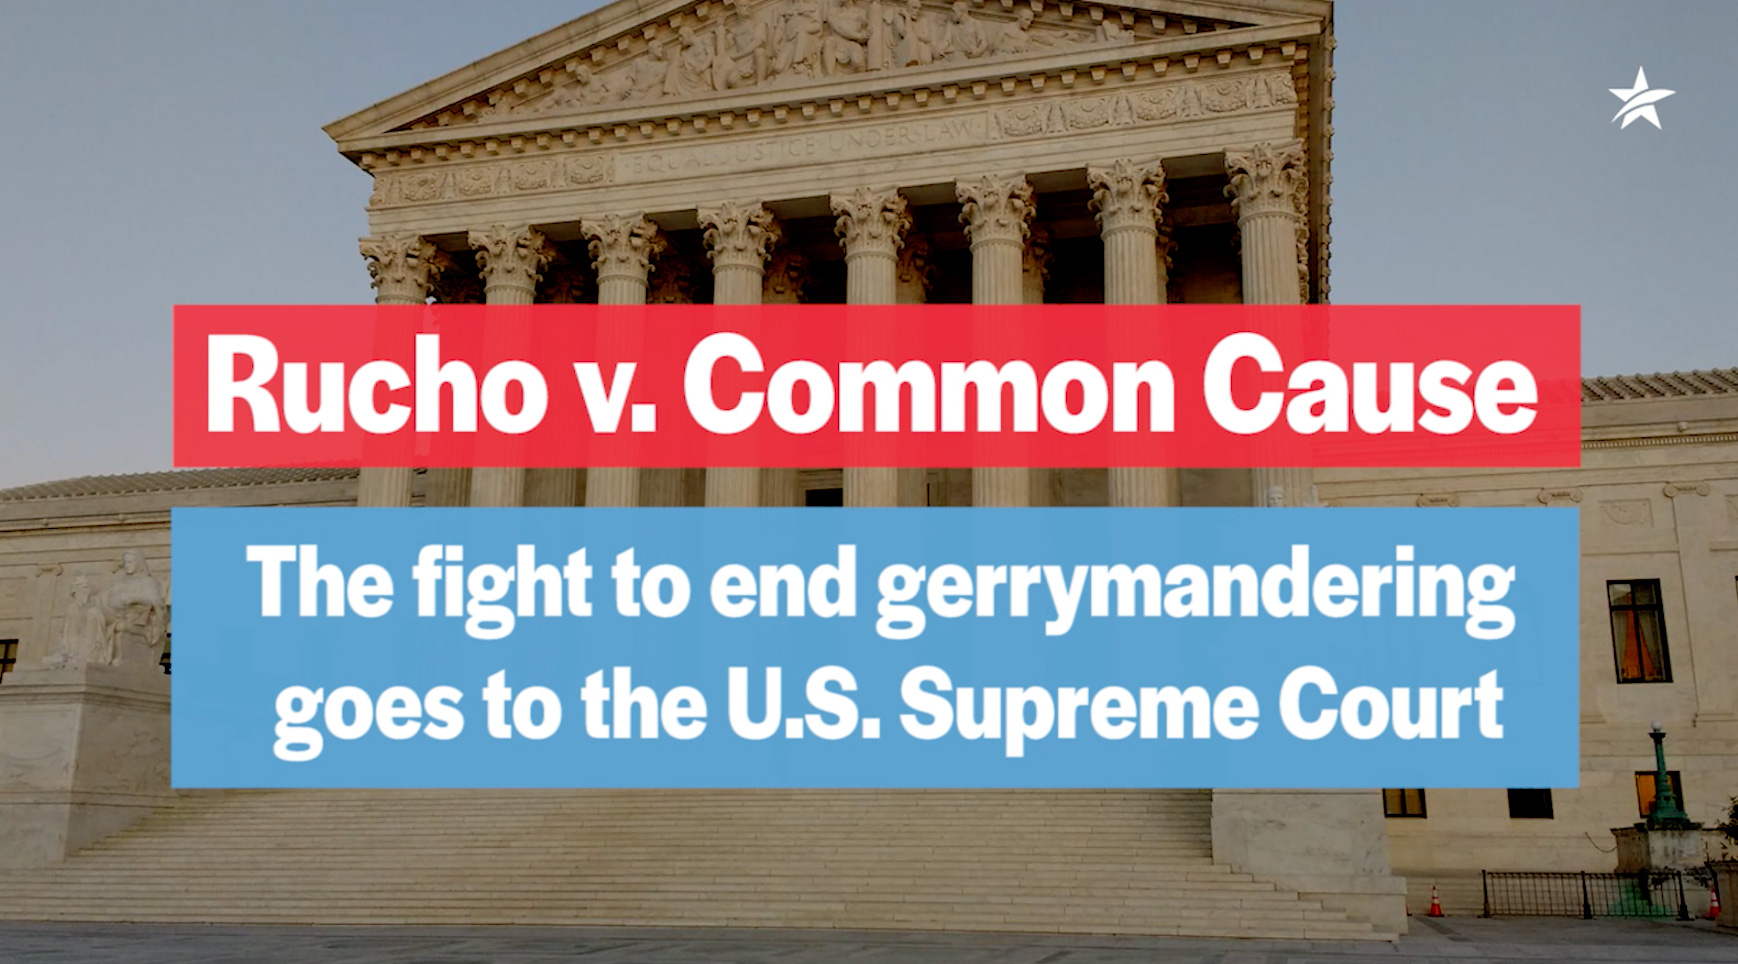 Rucho v Common Cause: Gerrymandering goes to the Supreme Court